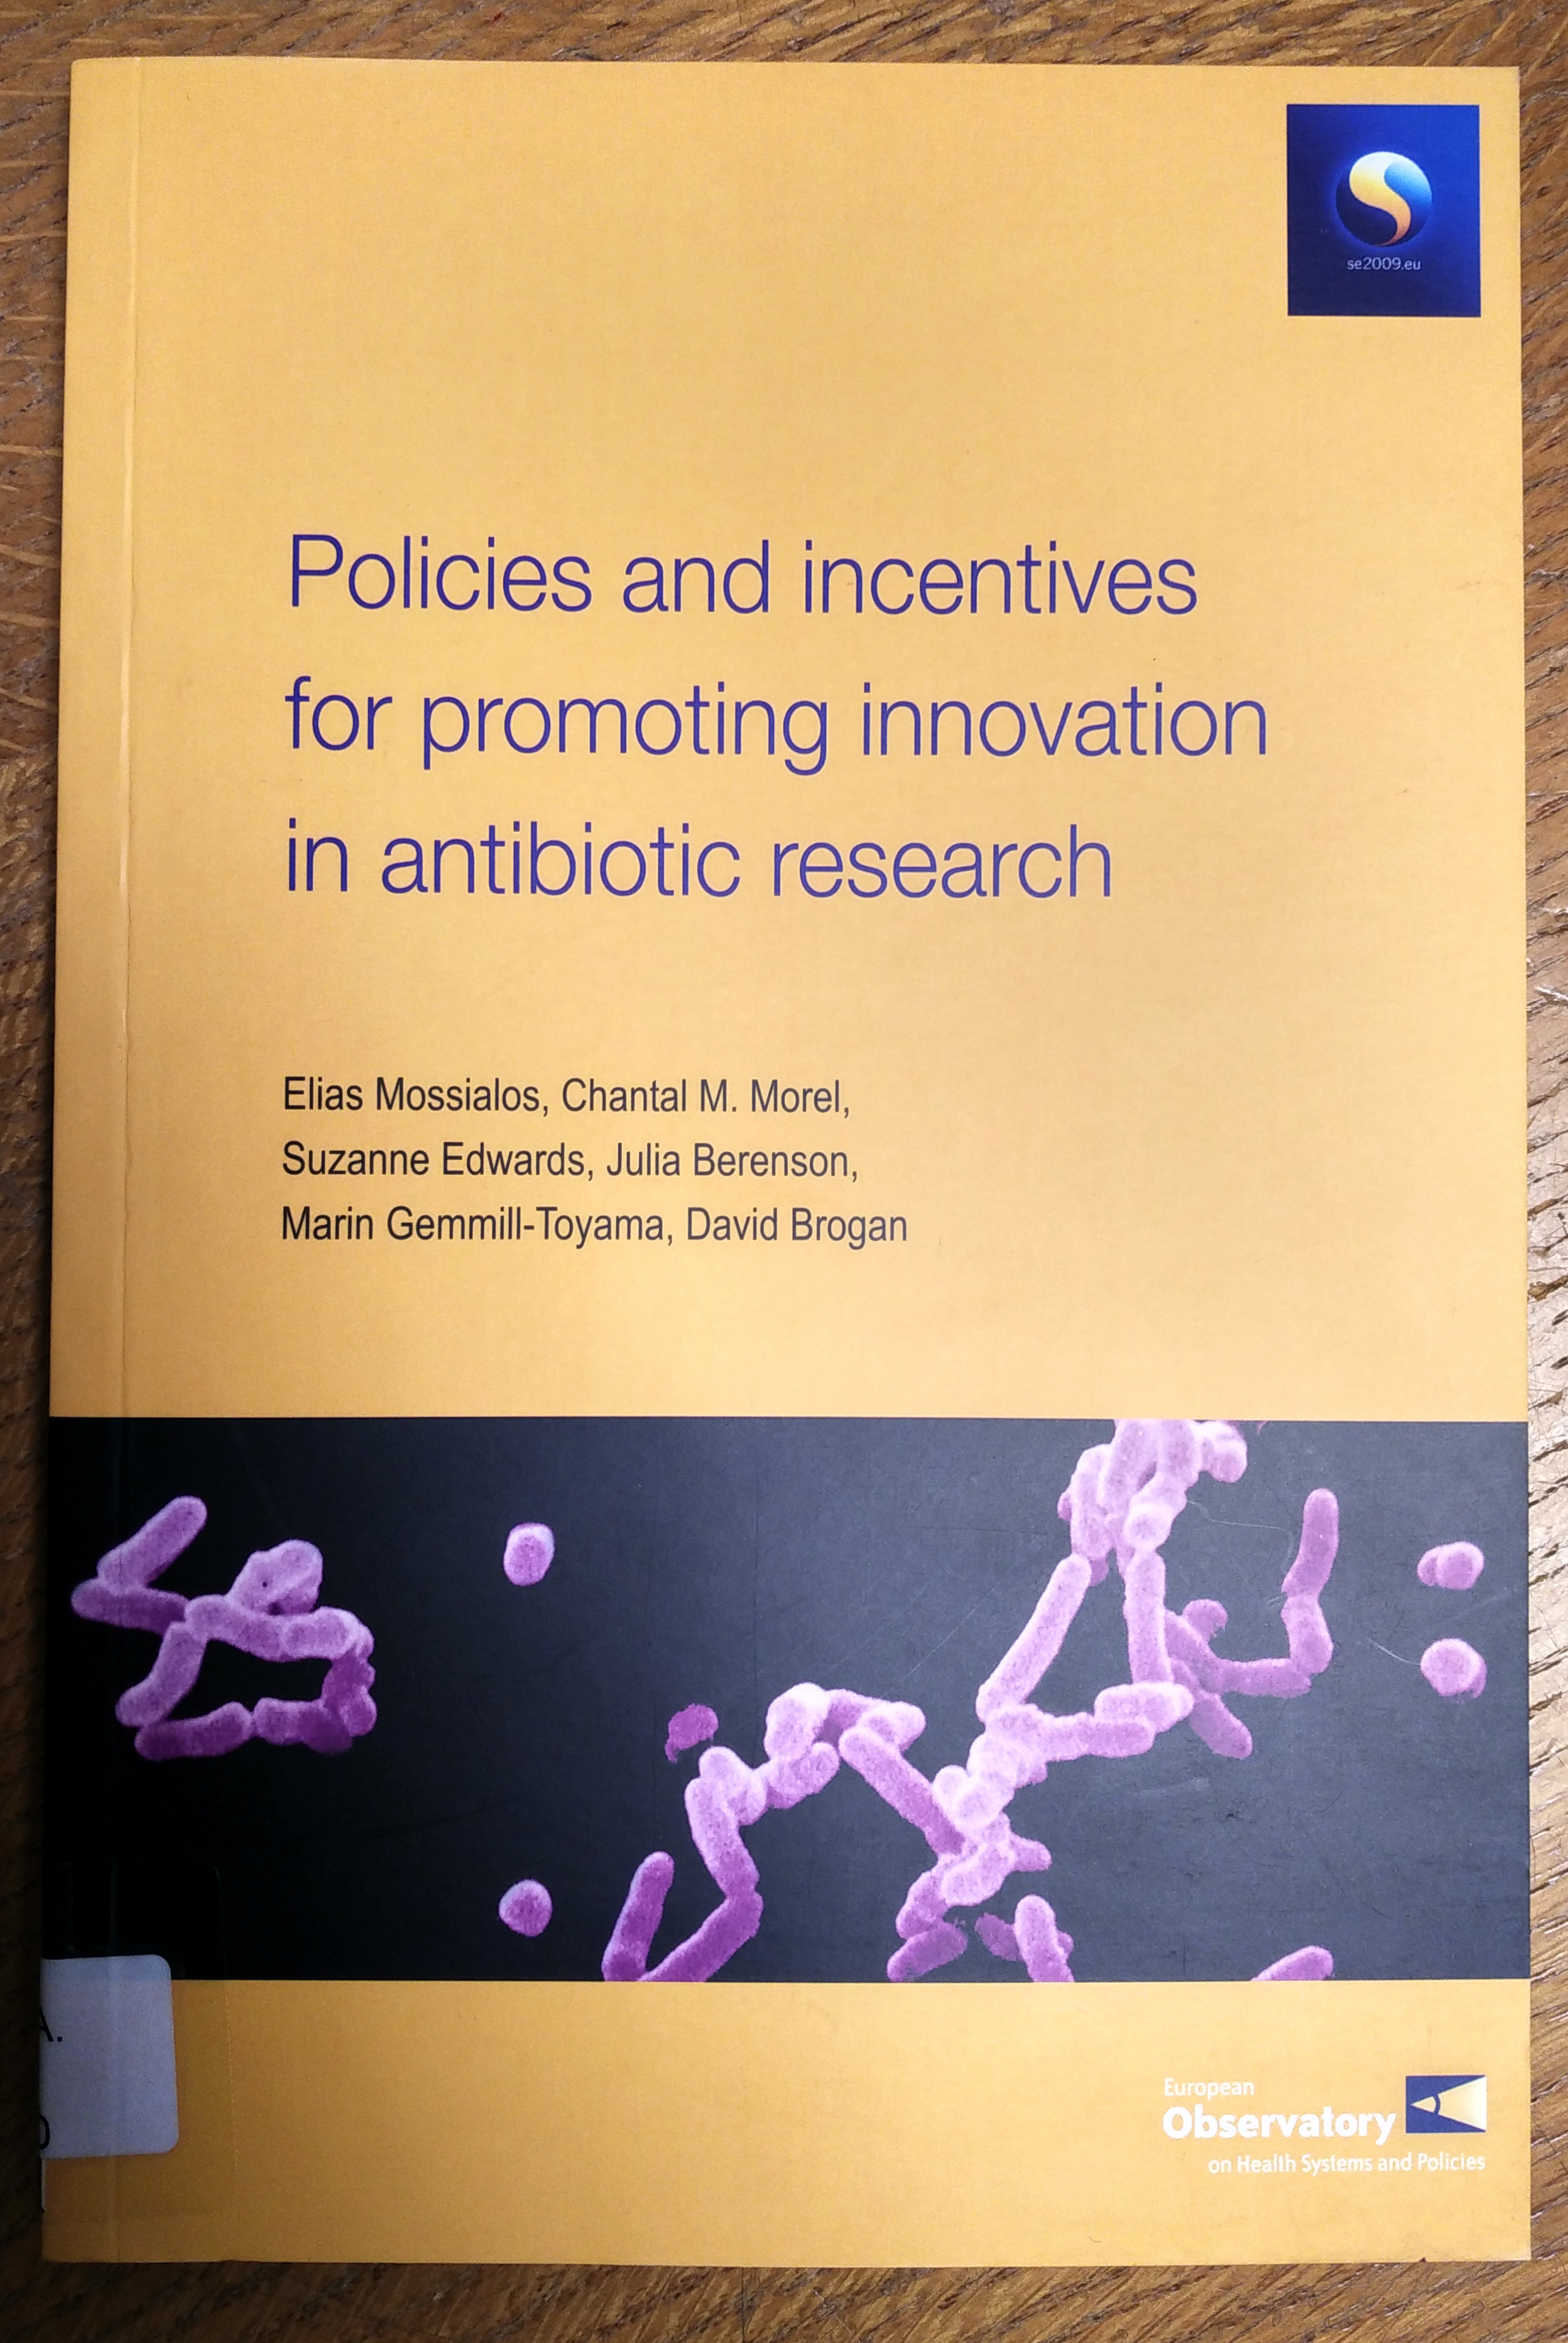 Policies and incentives for promoting innovation in antibiotic research